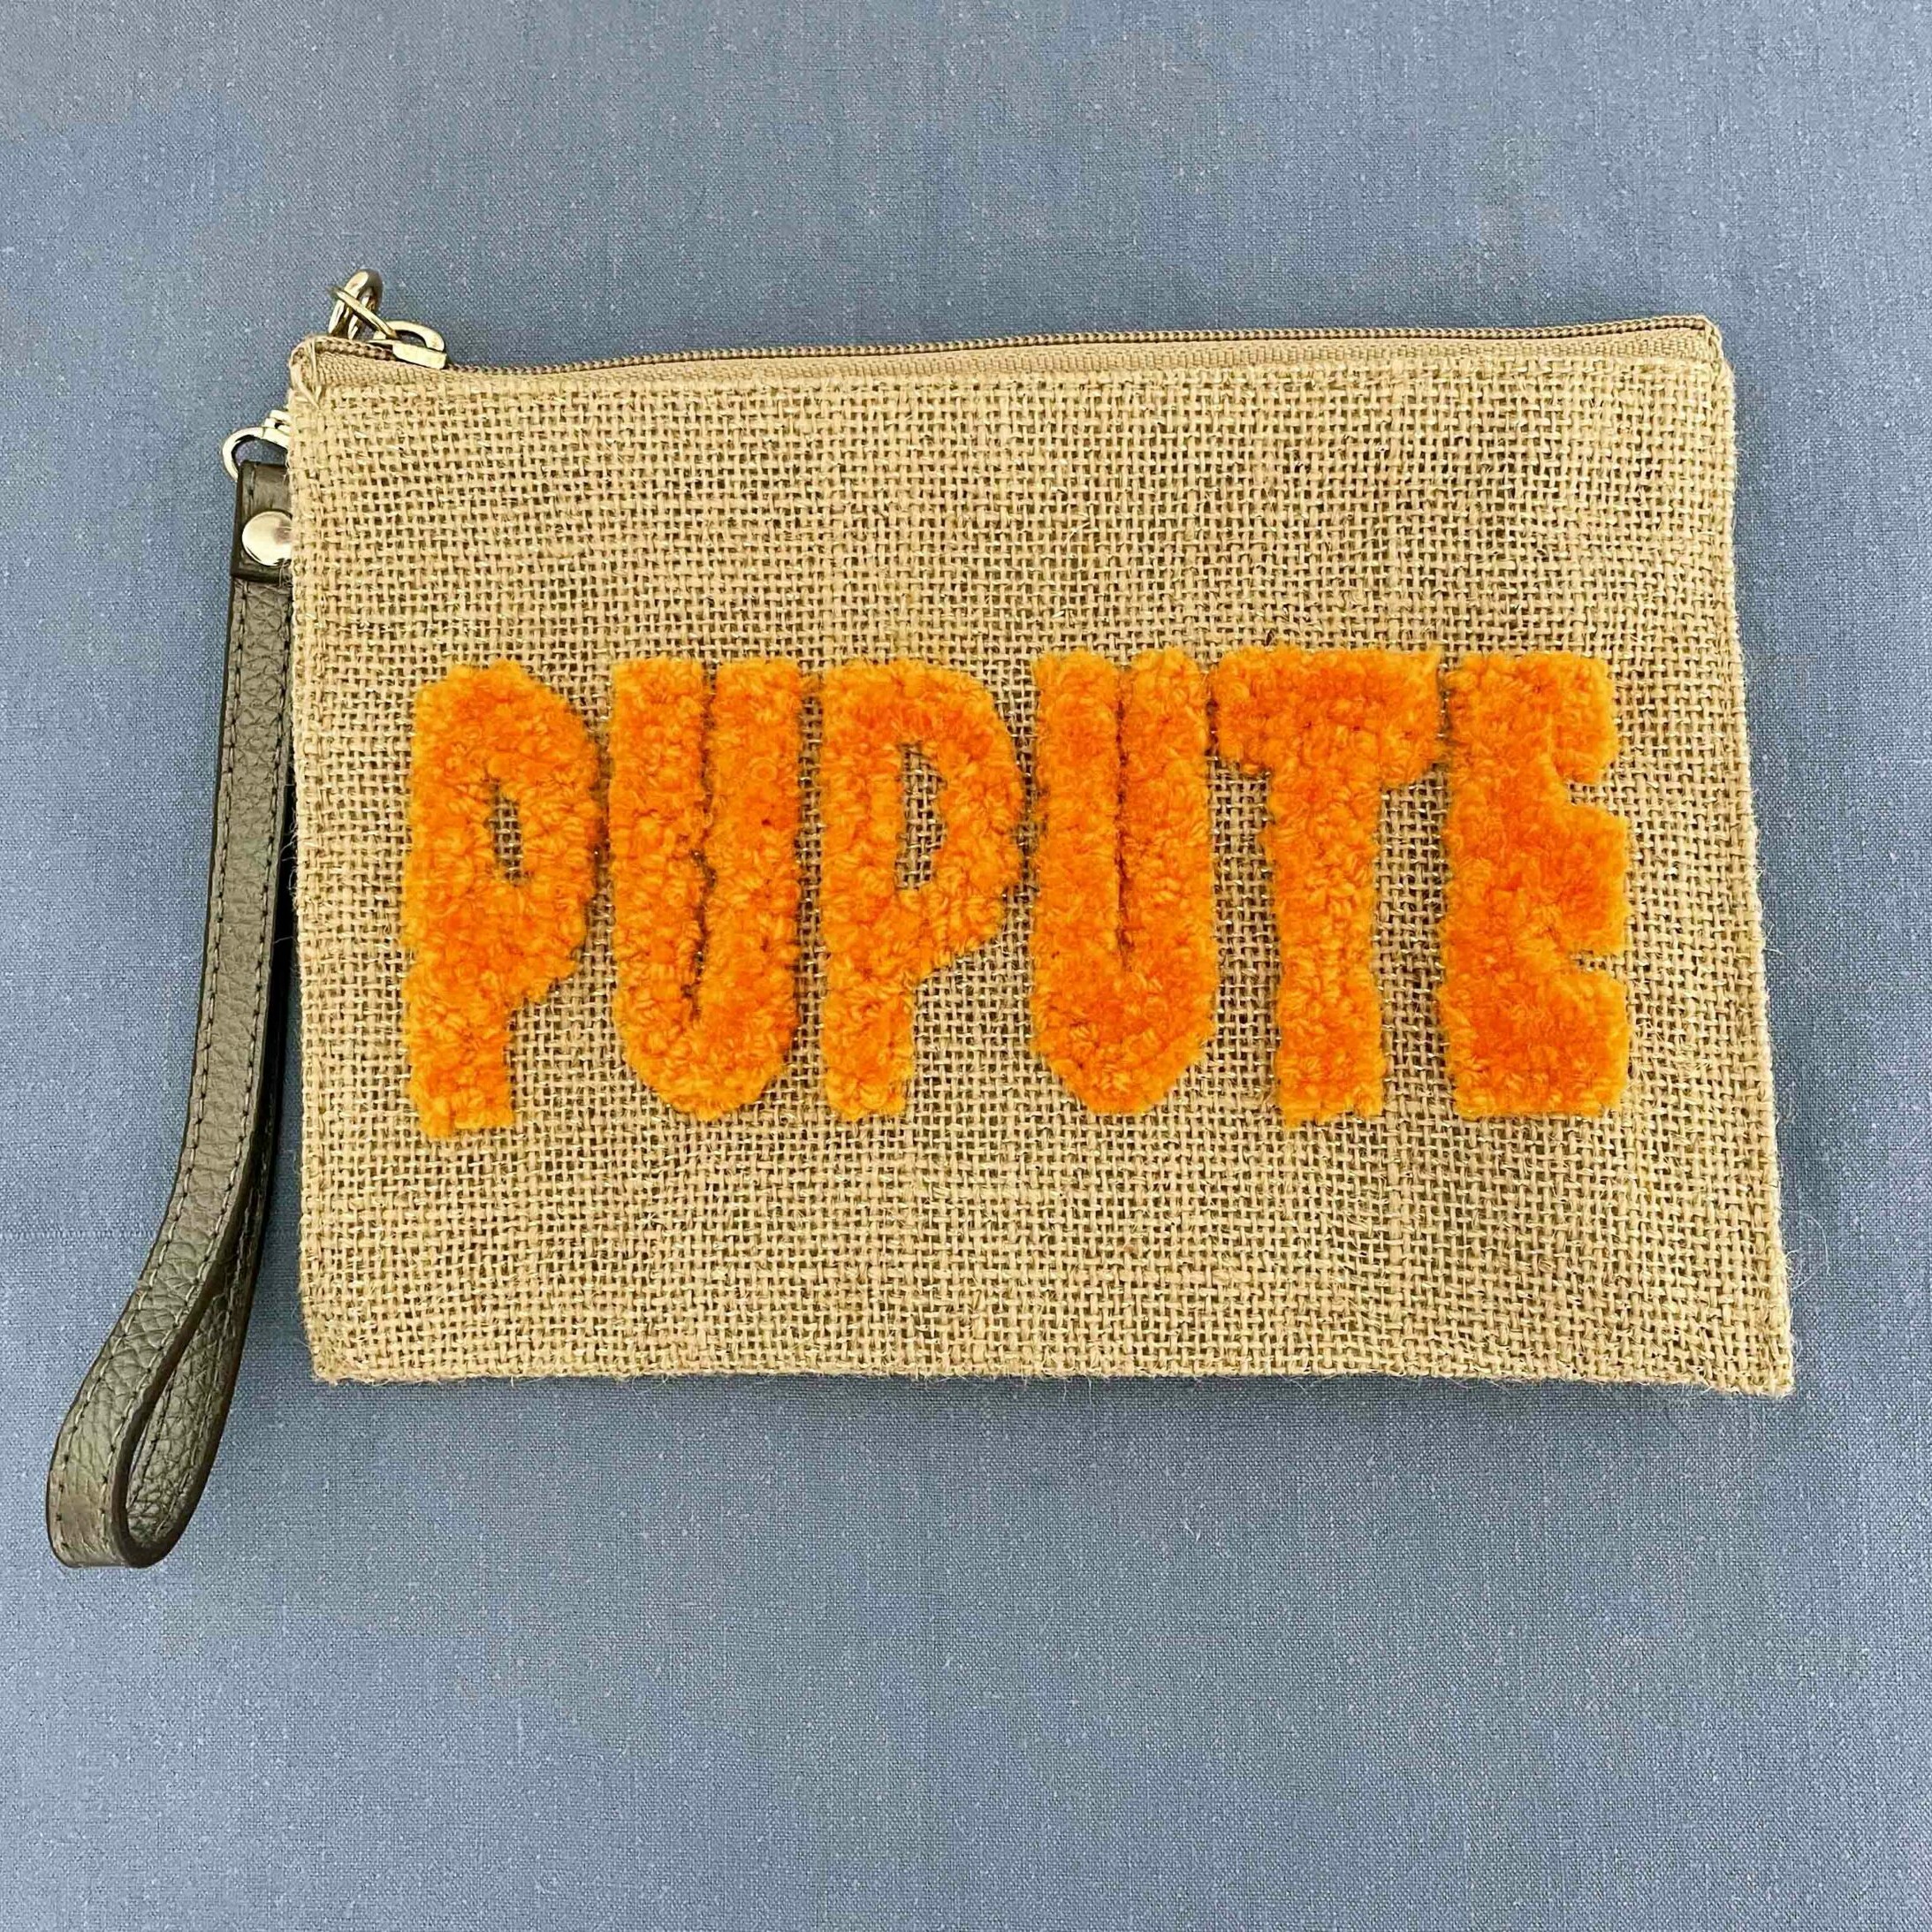 PETITE POCHETTE PUPUTE BY BROC INTO THE MOON